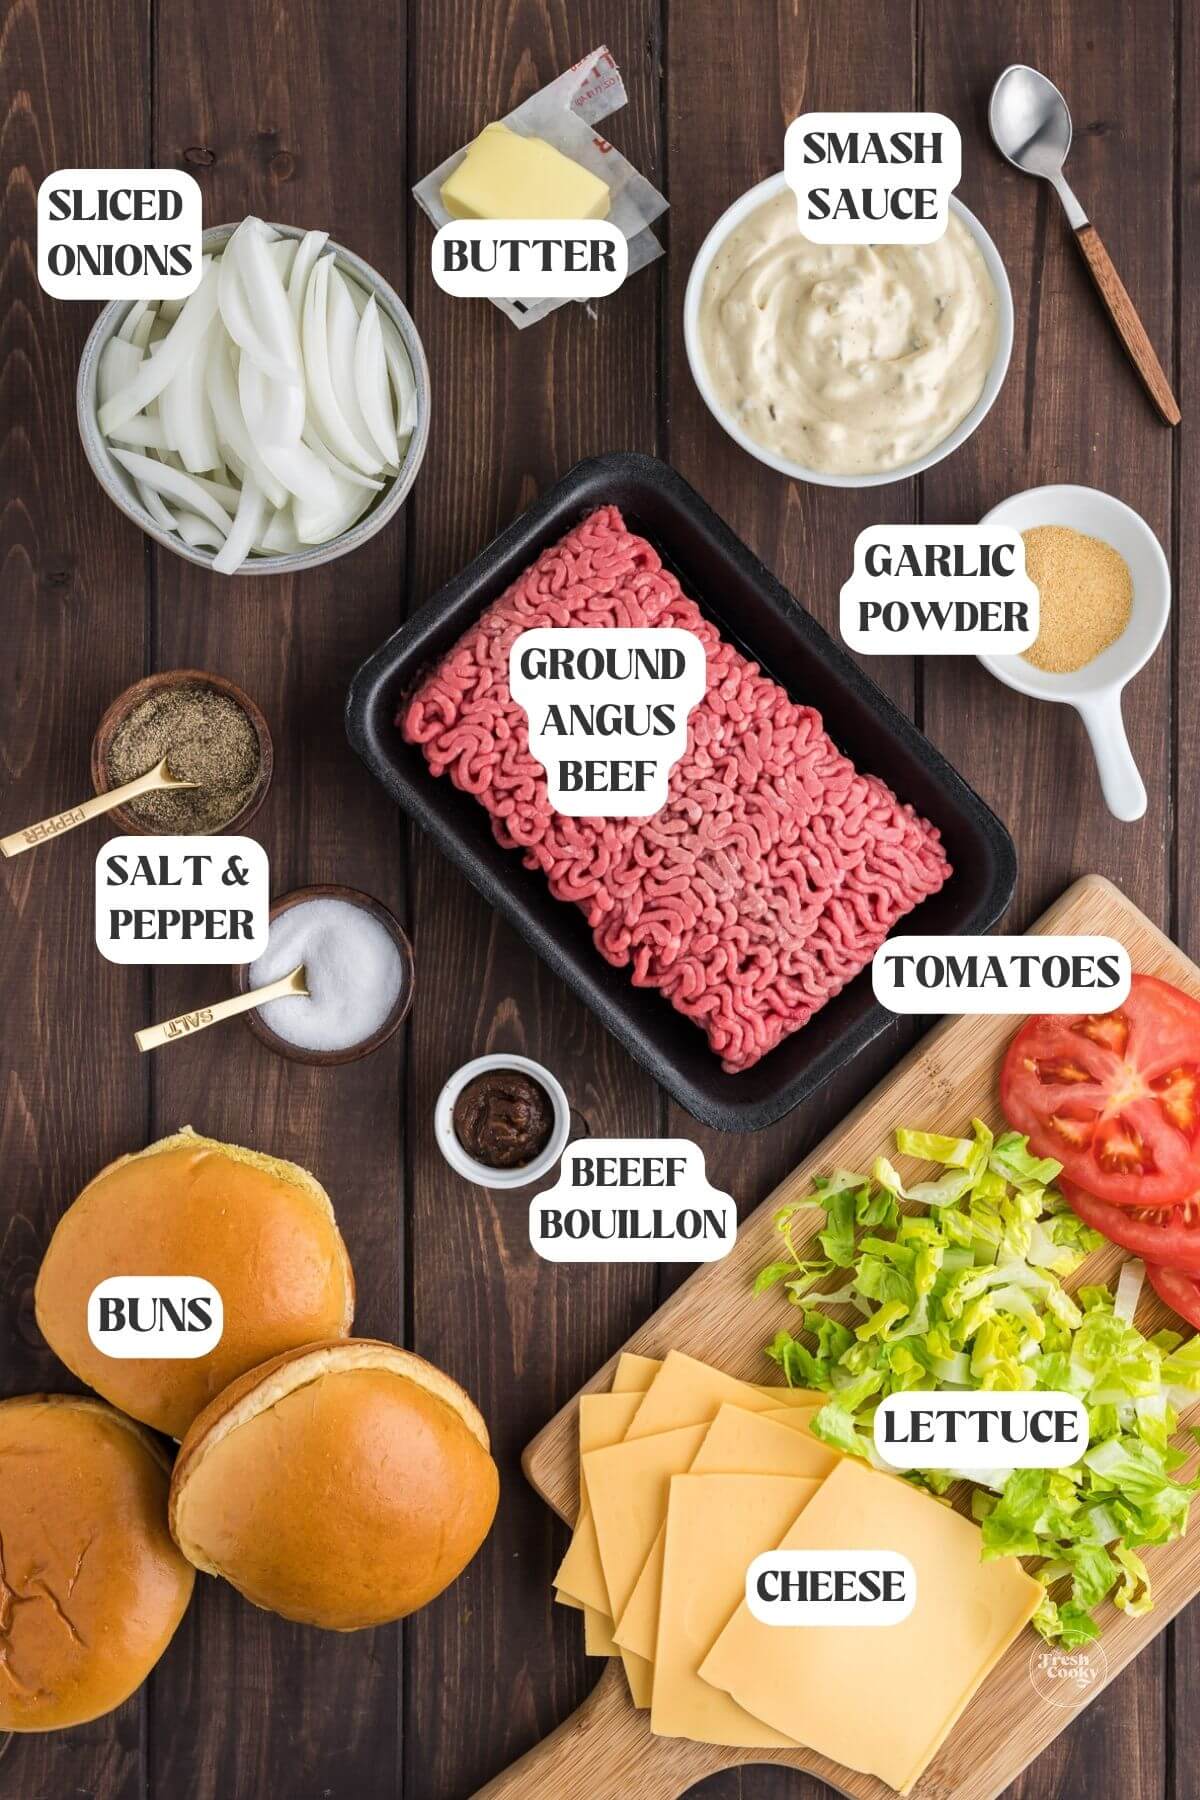 Labeled ingredients for smashburger with onions made on blackstone.